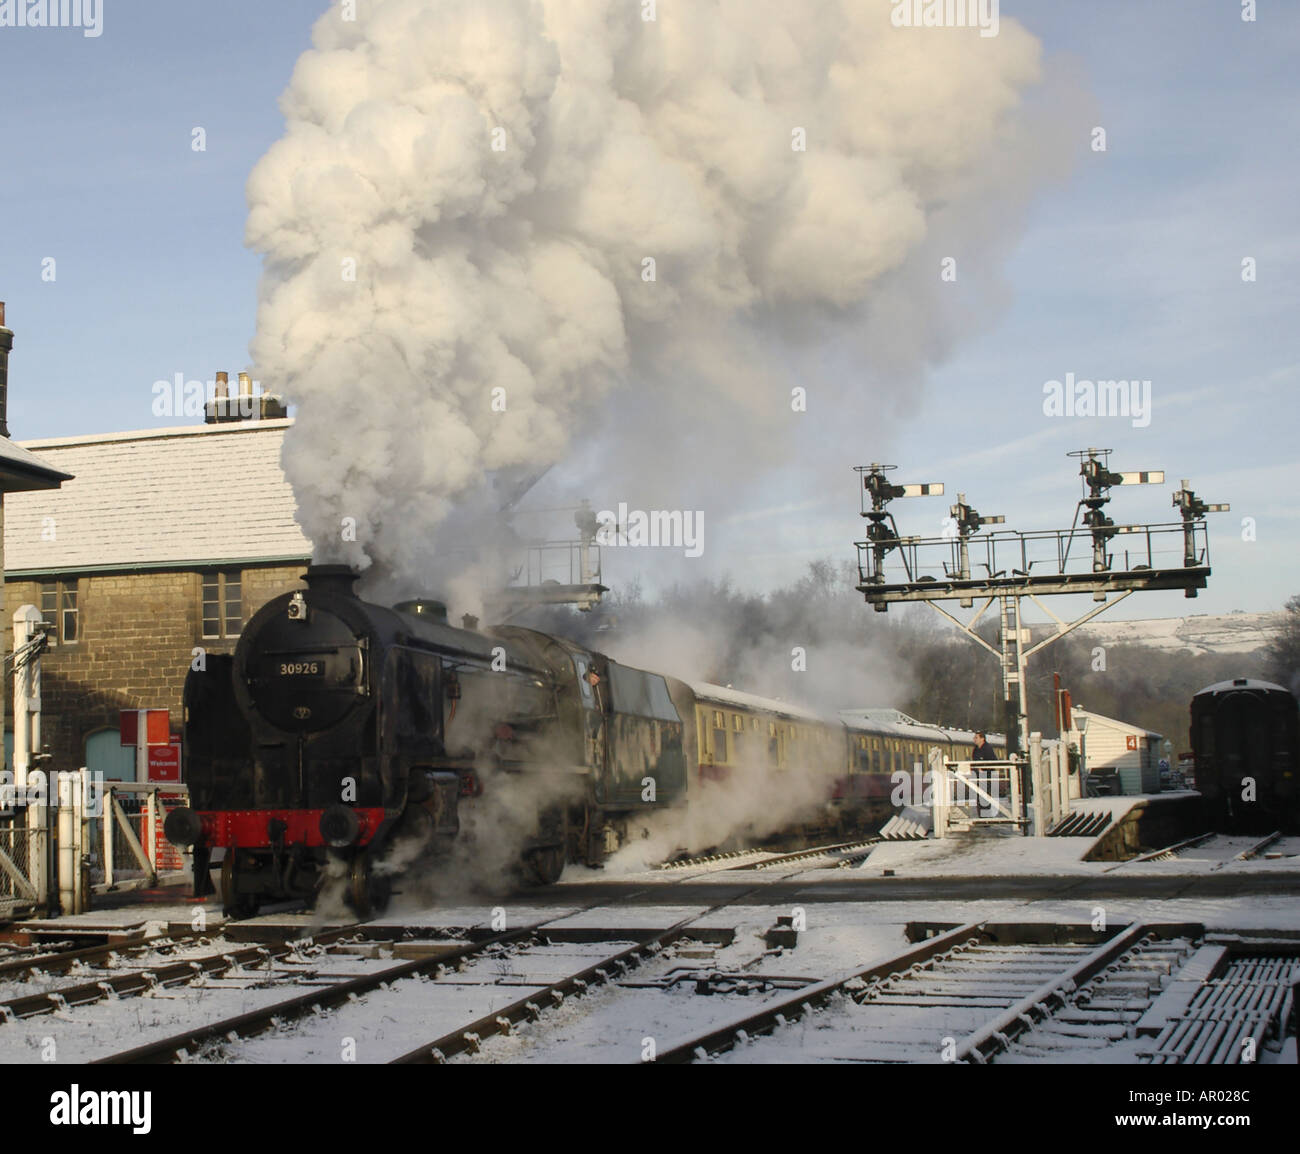 Motore a vapore in inverno North York Moors Grosmont Ferroviaria Nord Yorkshire Foto Stock